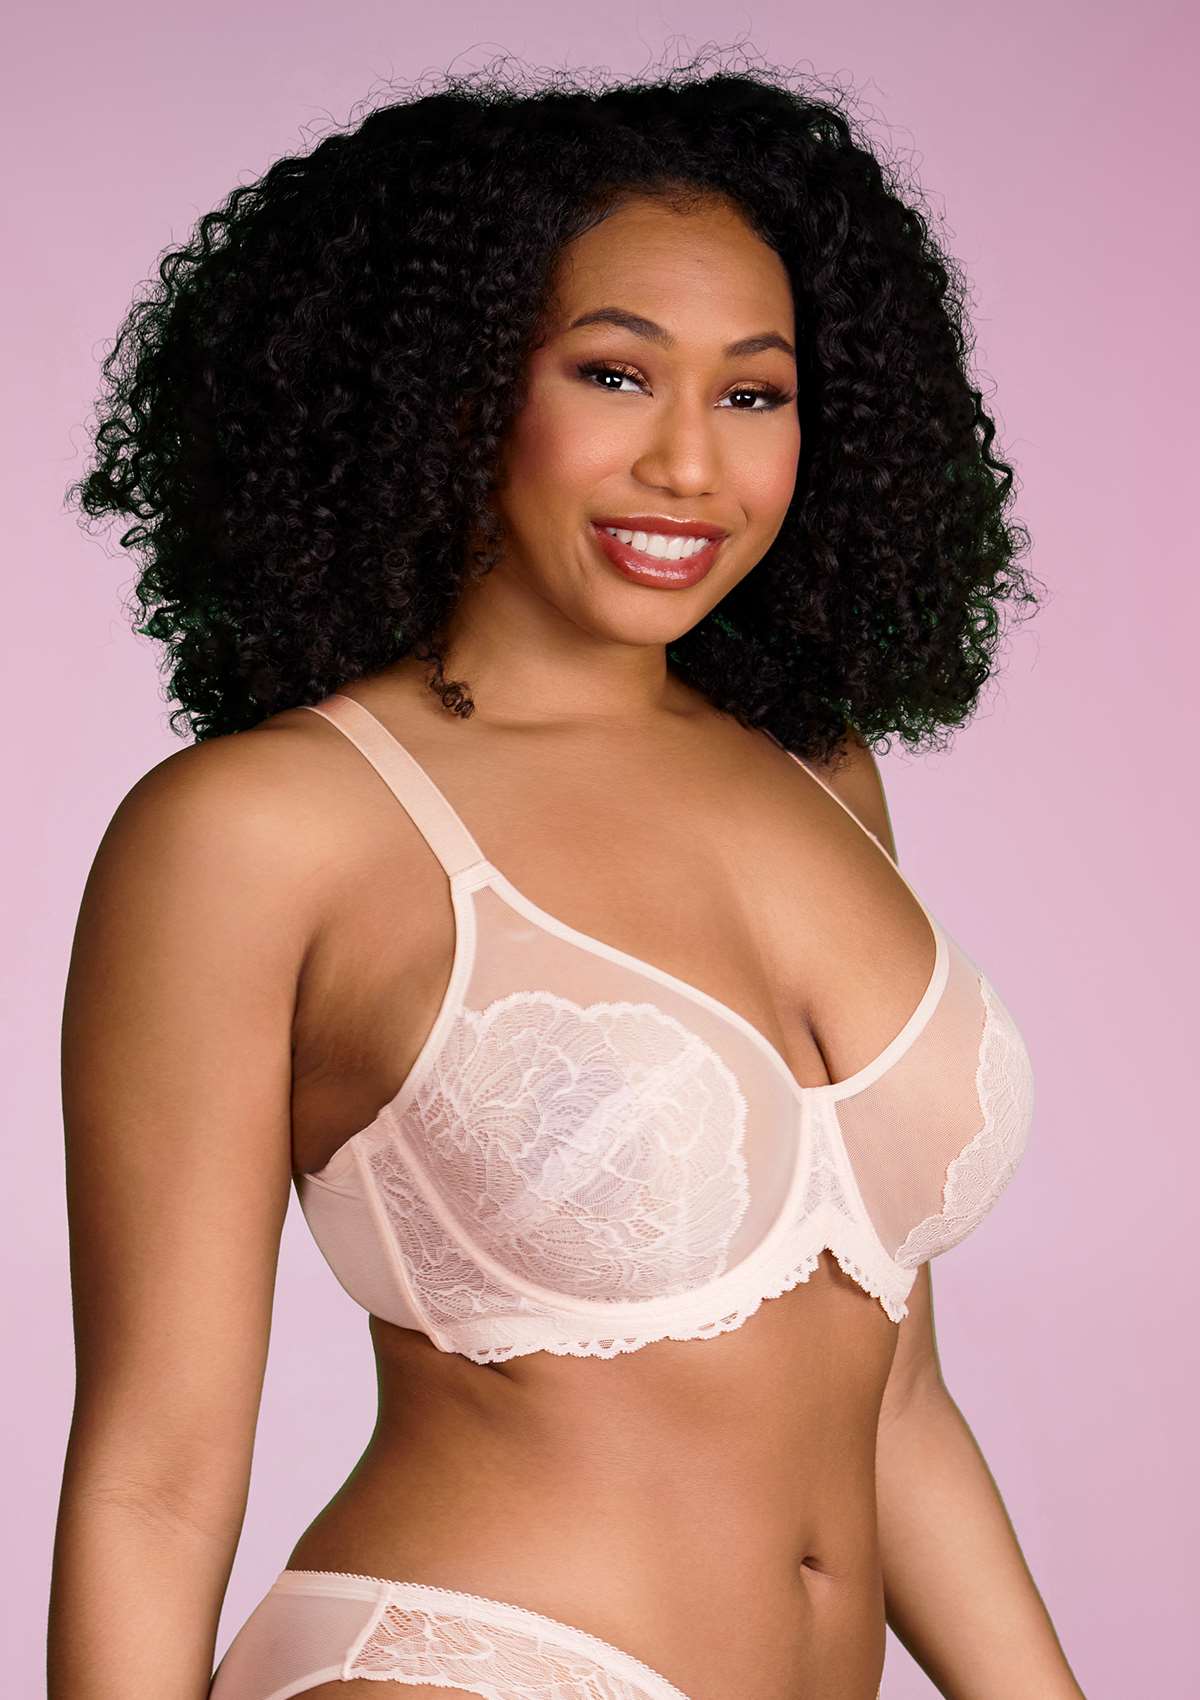 HSIA Blossom Sheer Lace Bra: Comfortable Underwire Bra For Big Busts - White / 42 / G